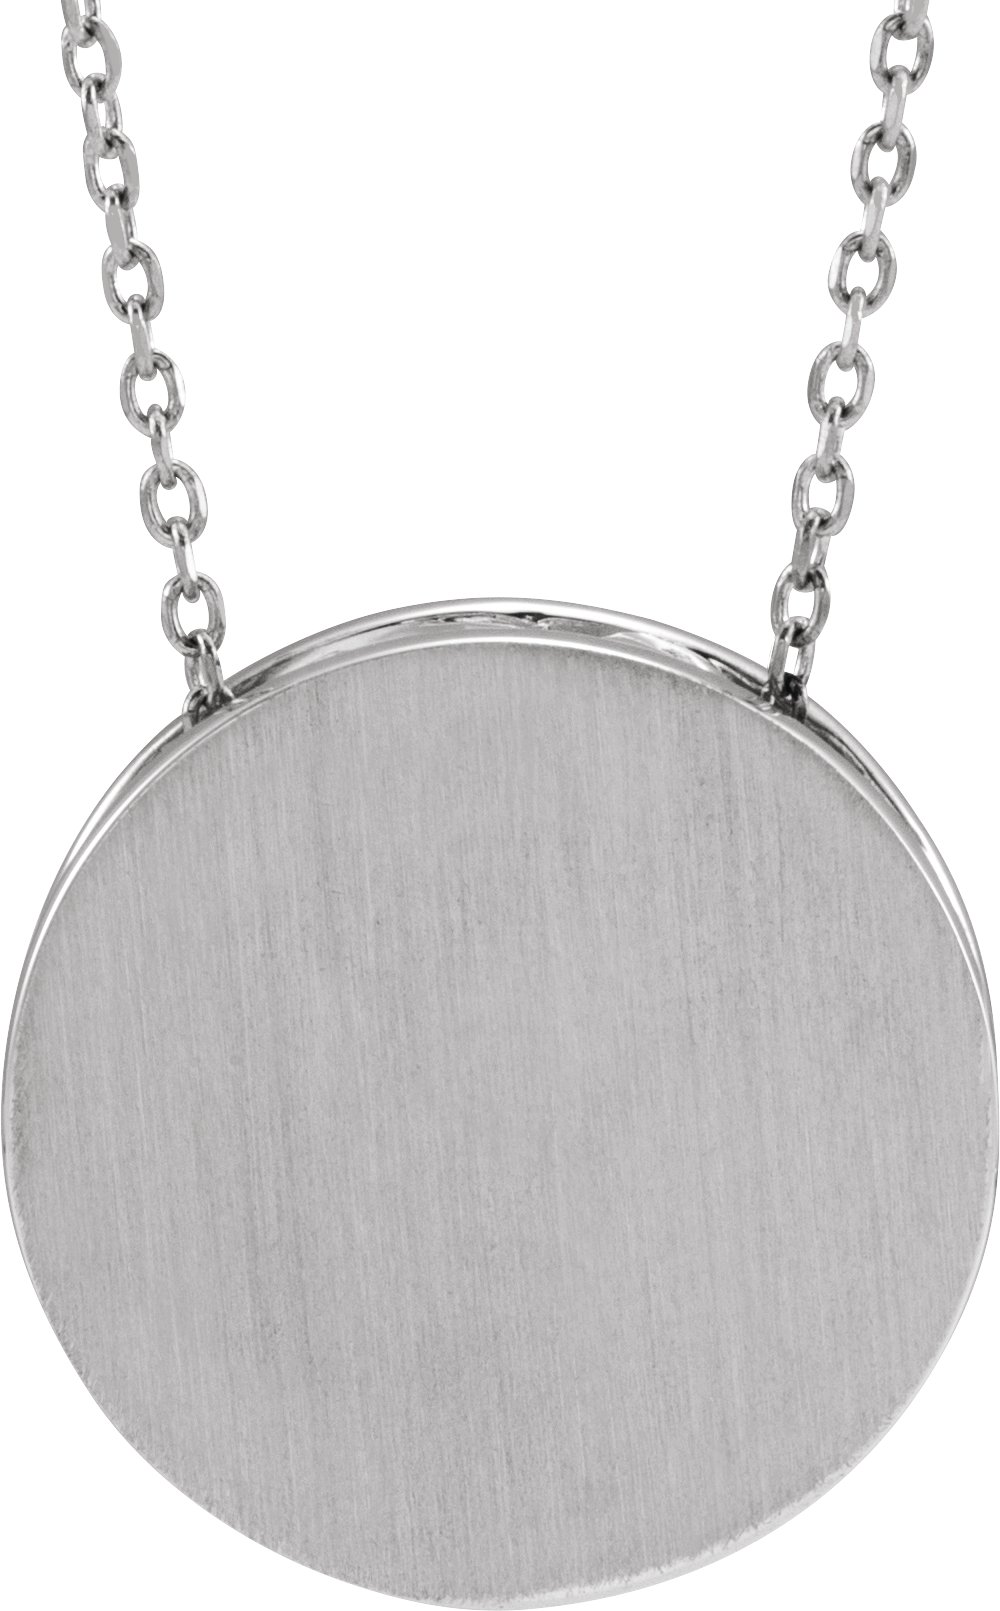 14K White 12.5 mm Scroll Disc 16-18" Necklace